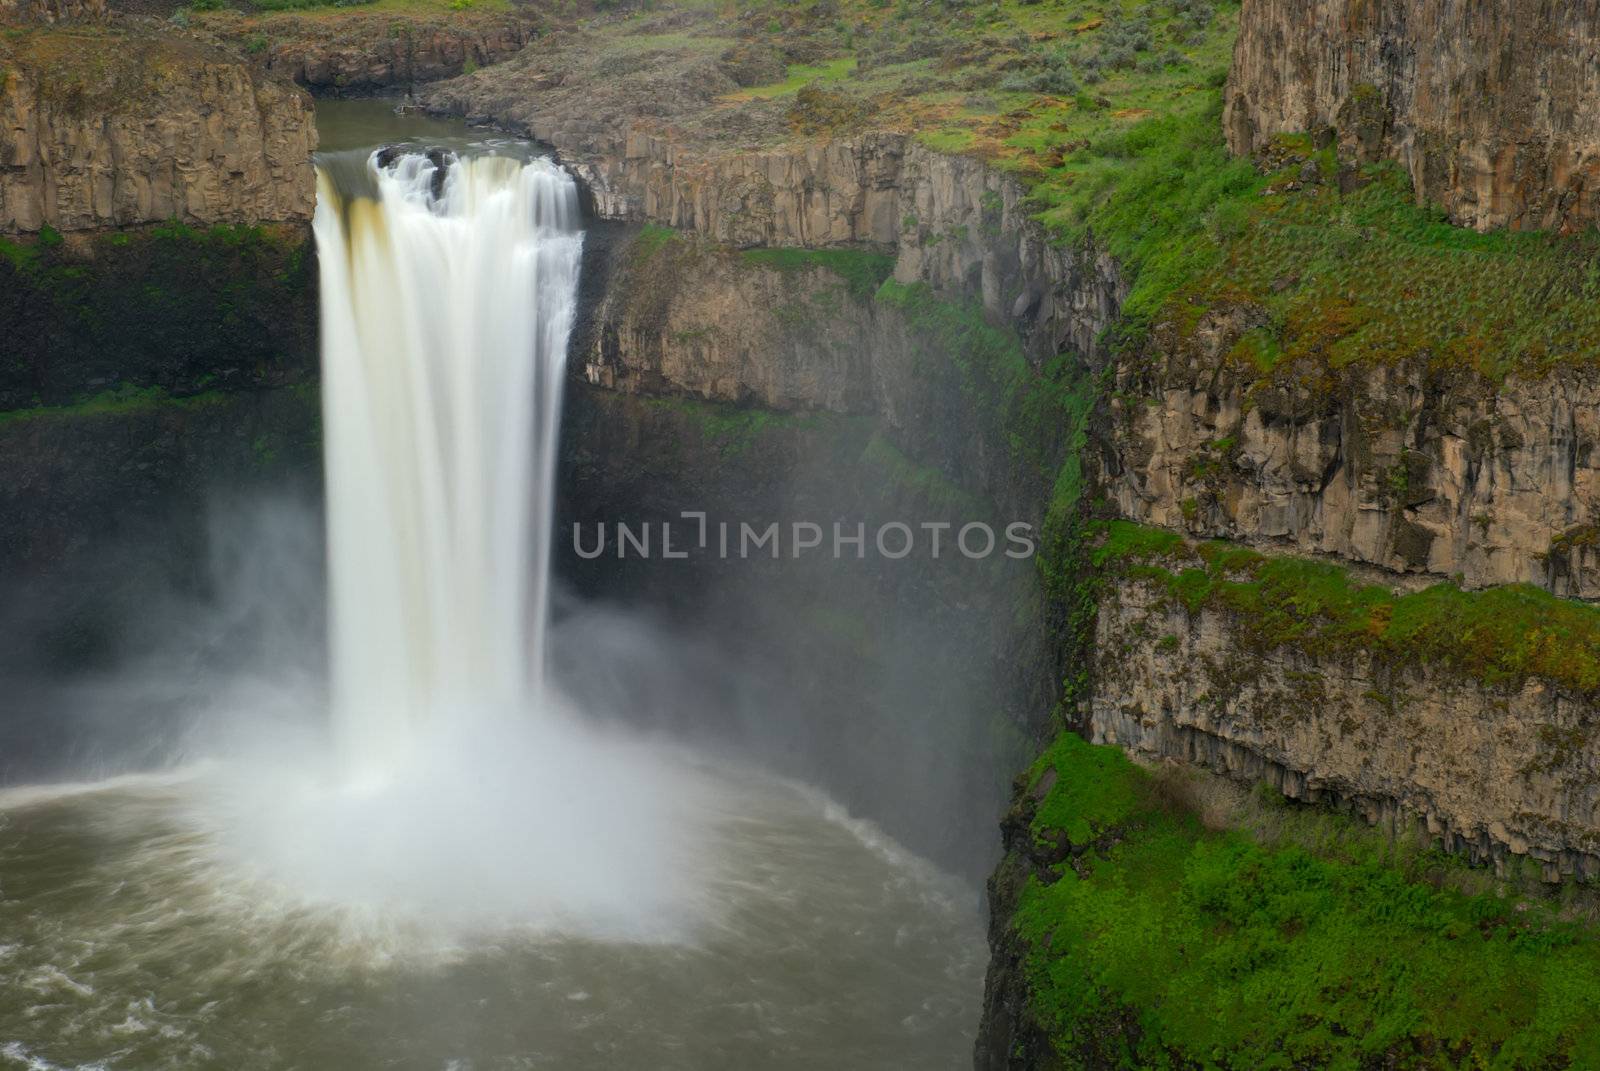 Palouse Falls (198 ft. tall), Palouse Falls State Park, Franklin and Whitman Counties, Washington, USA by CharlesBolin